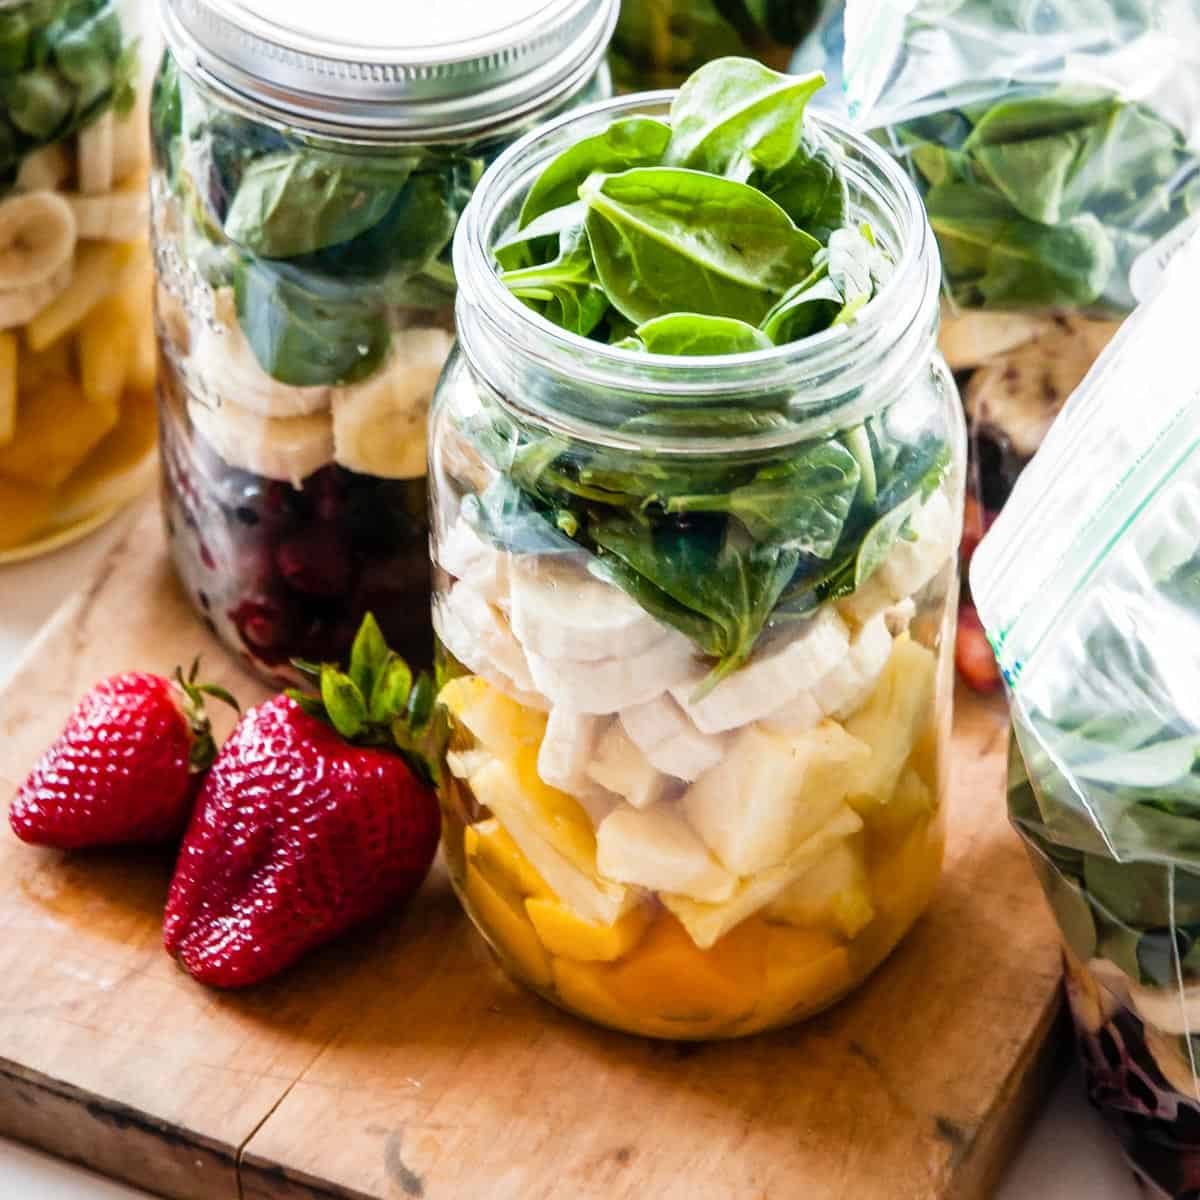 https://simplegreensmoothies.com/wp-content/uploads/meal-prep-smoothies-make-ahead-freezing-smoothies-9.jpg